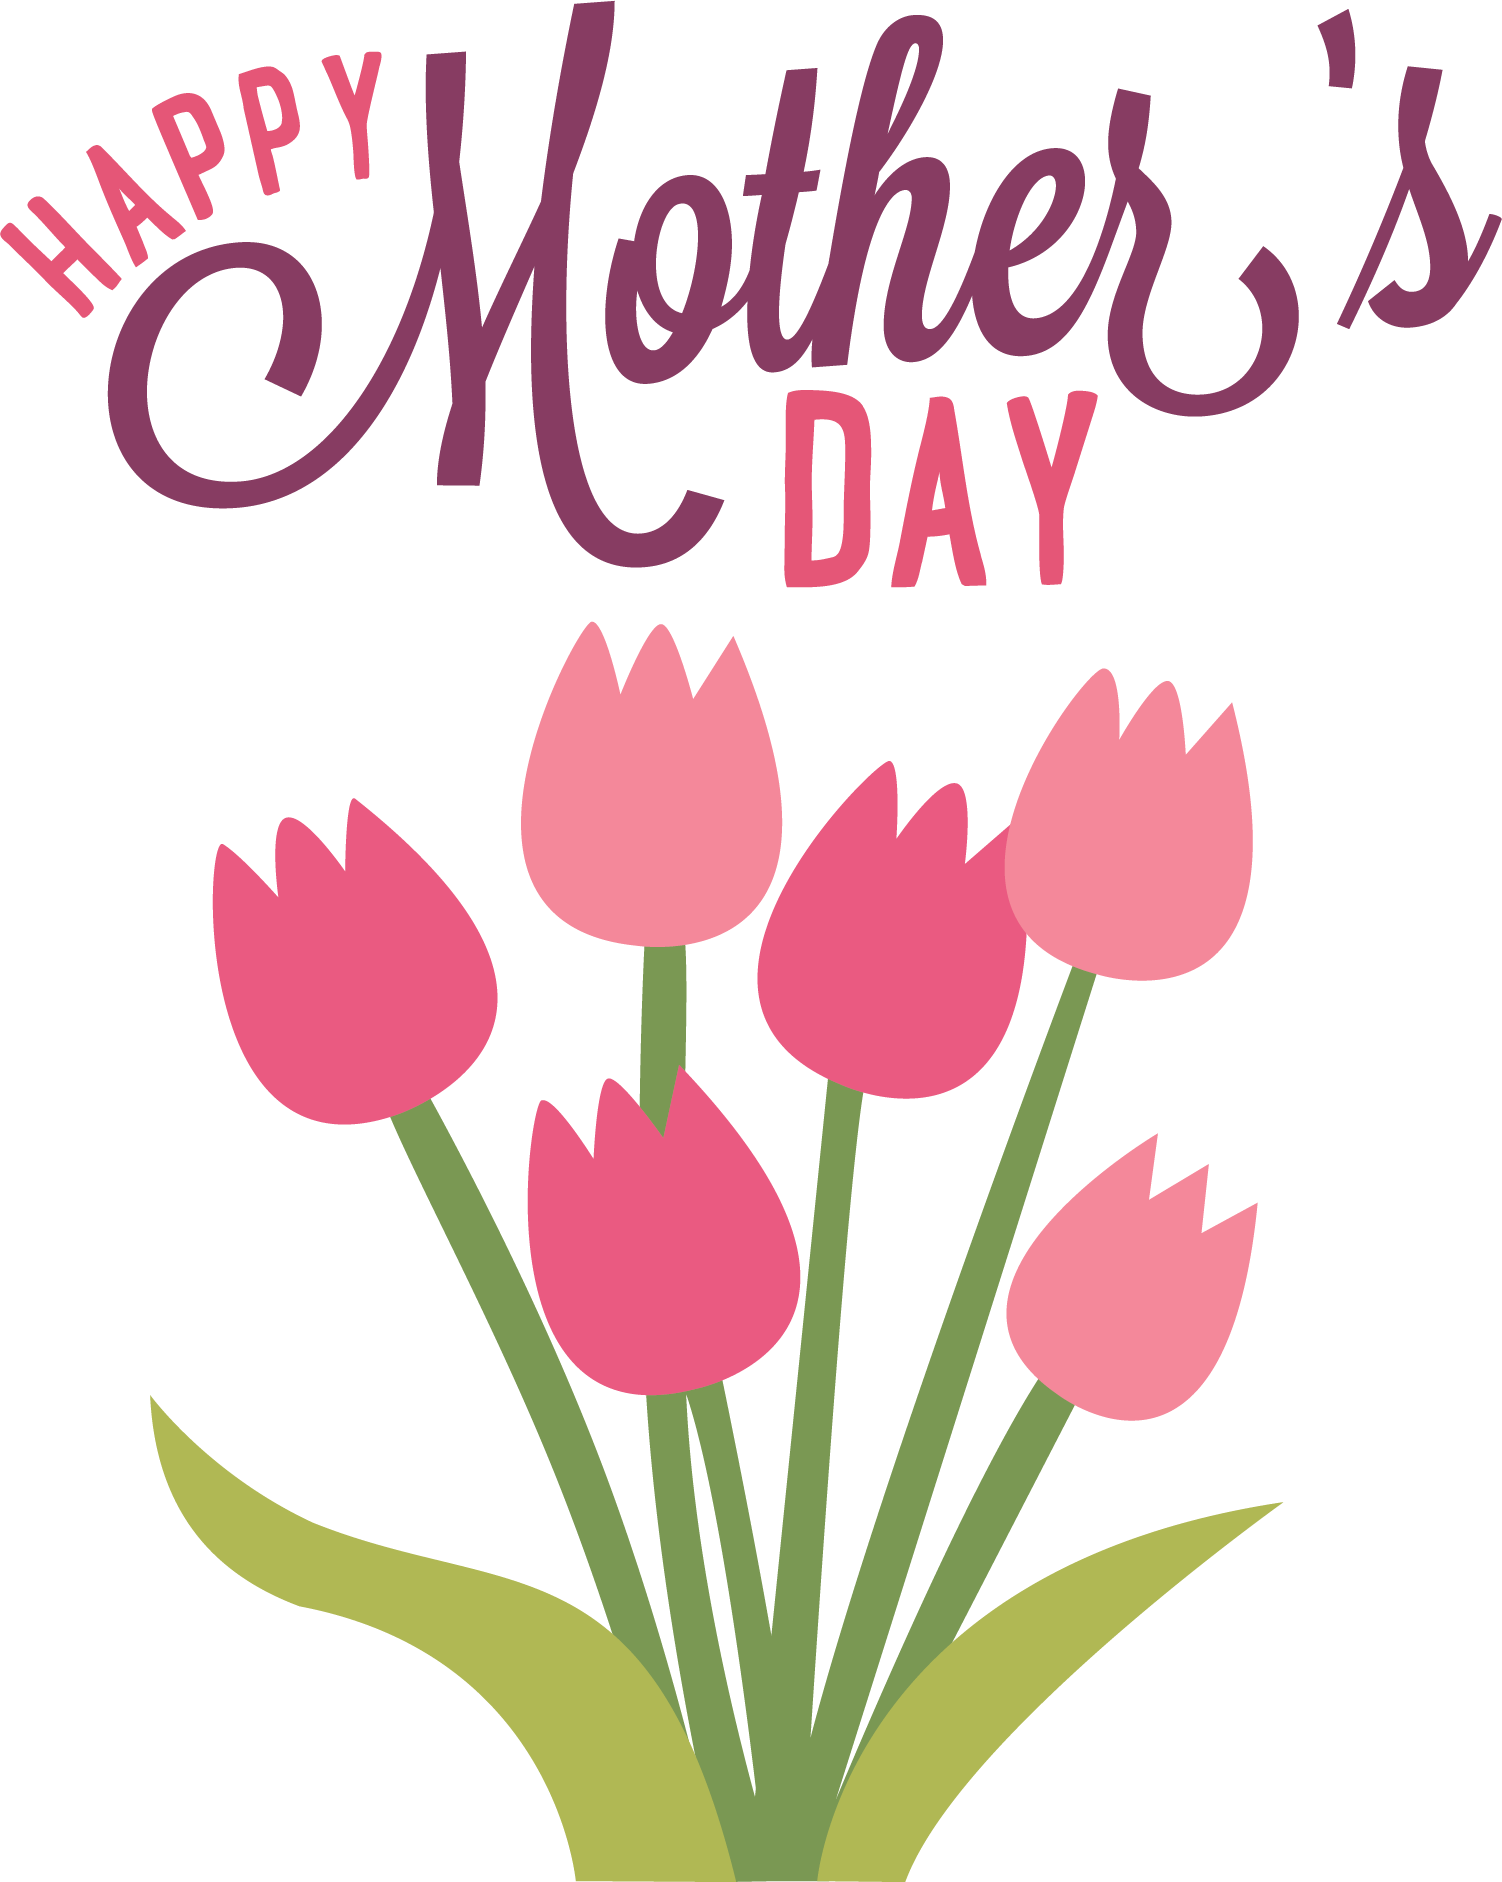 free-printable-mother-s-day-cards